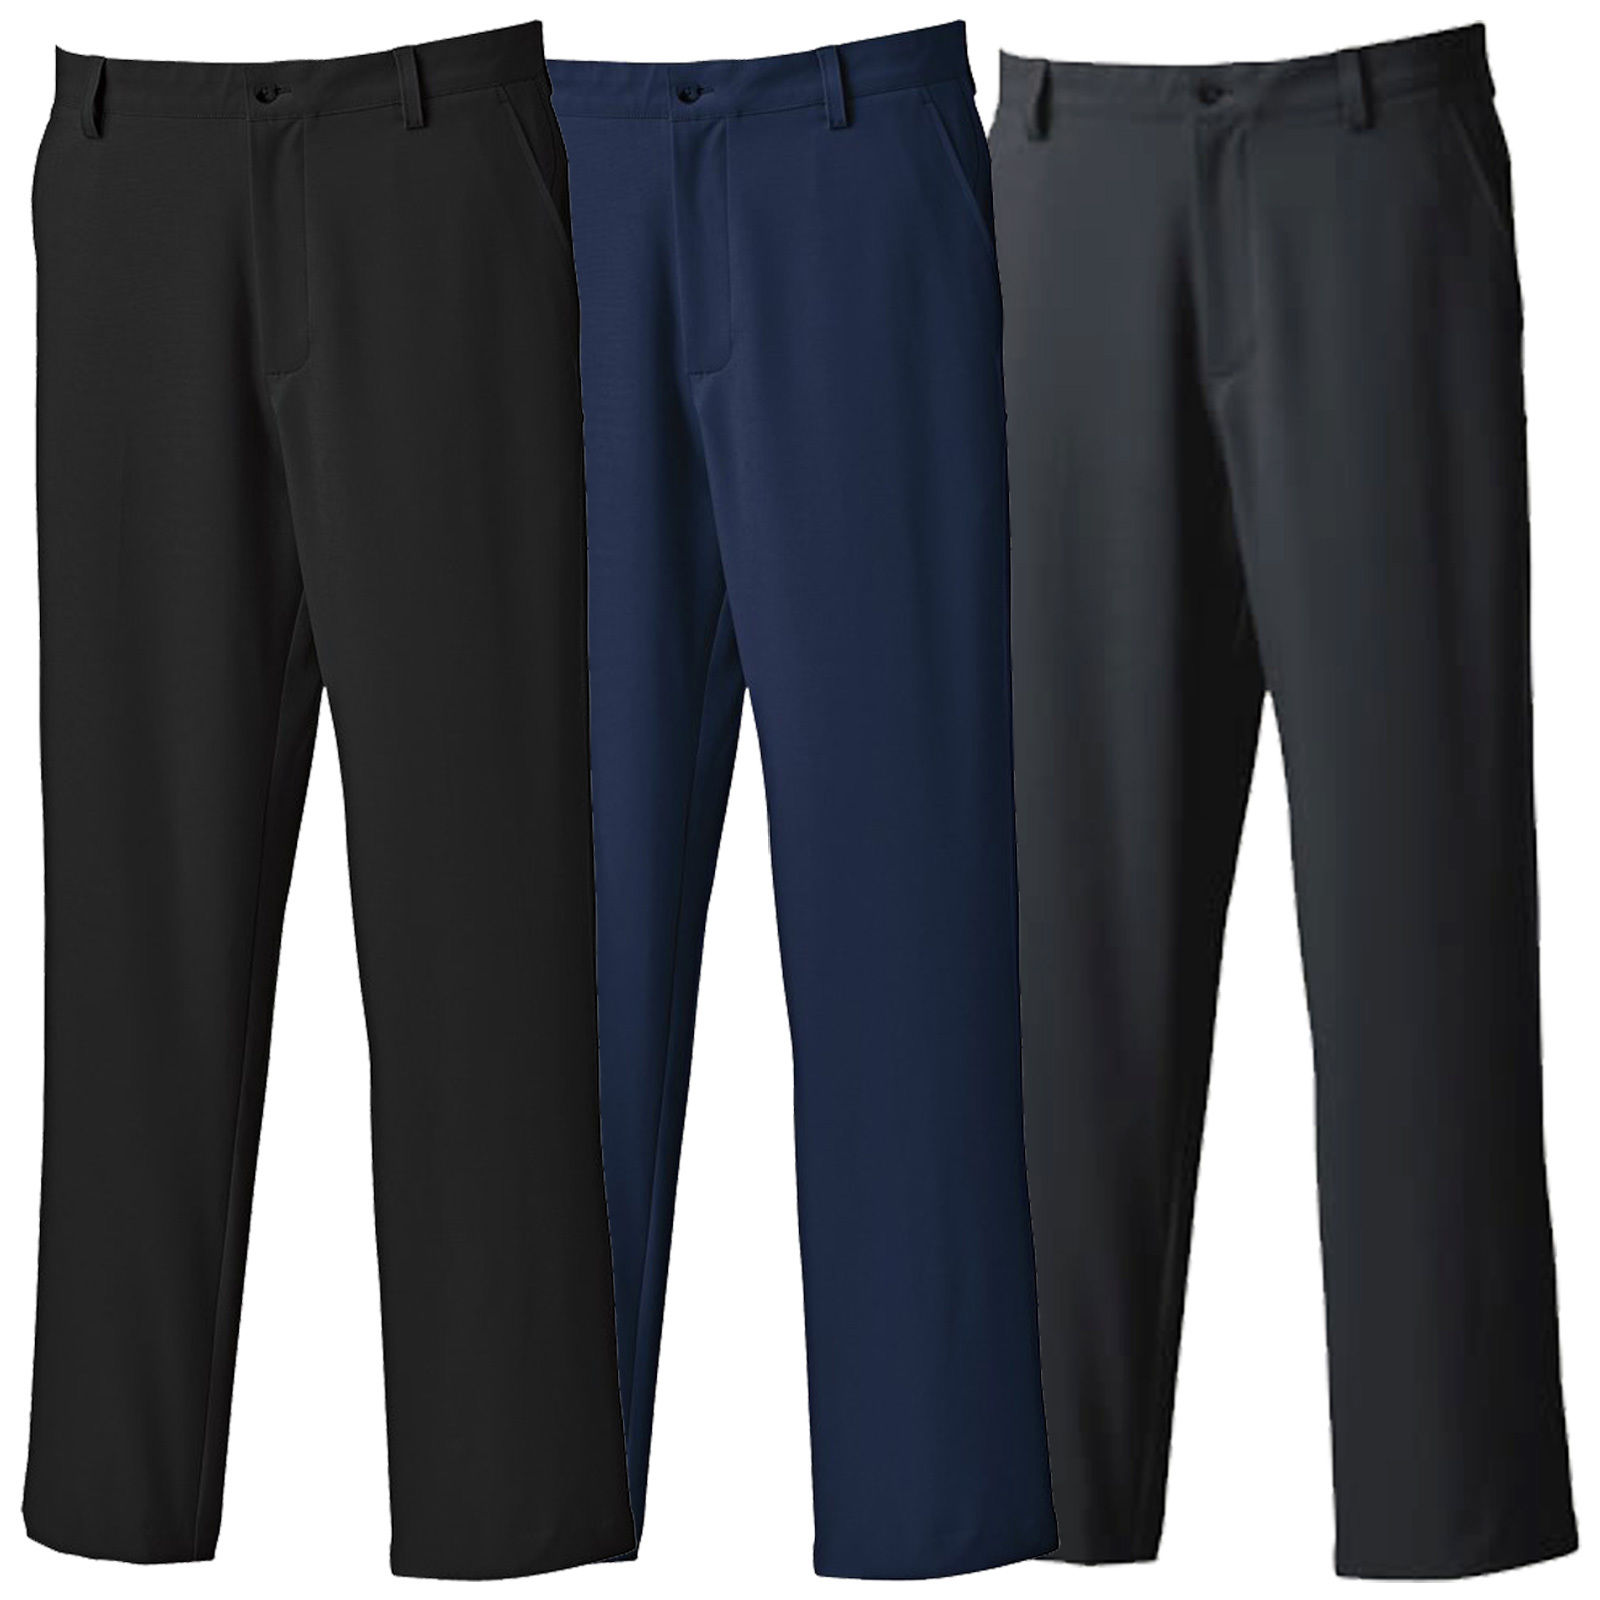 FOOTJOY MENS CLASSIC GOLF TROUSERS - NEW ESSENTIAL PERFORMANCE STRAIGHT ...